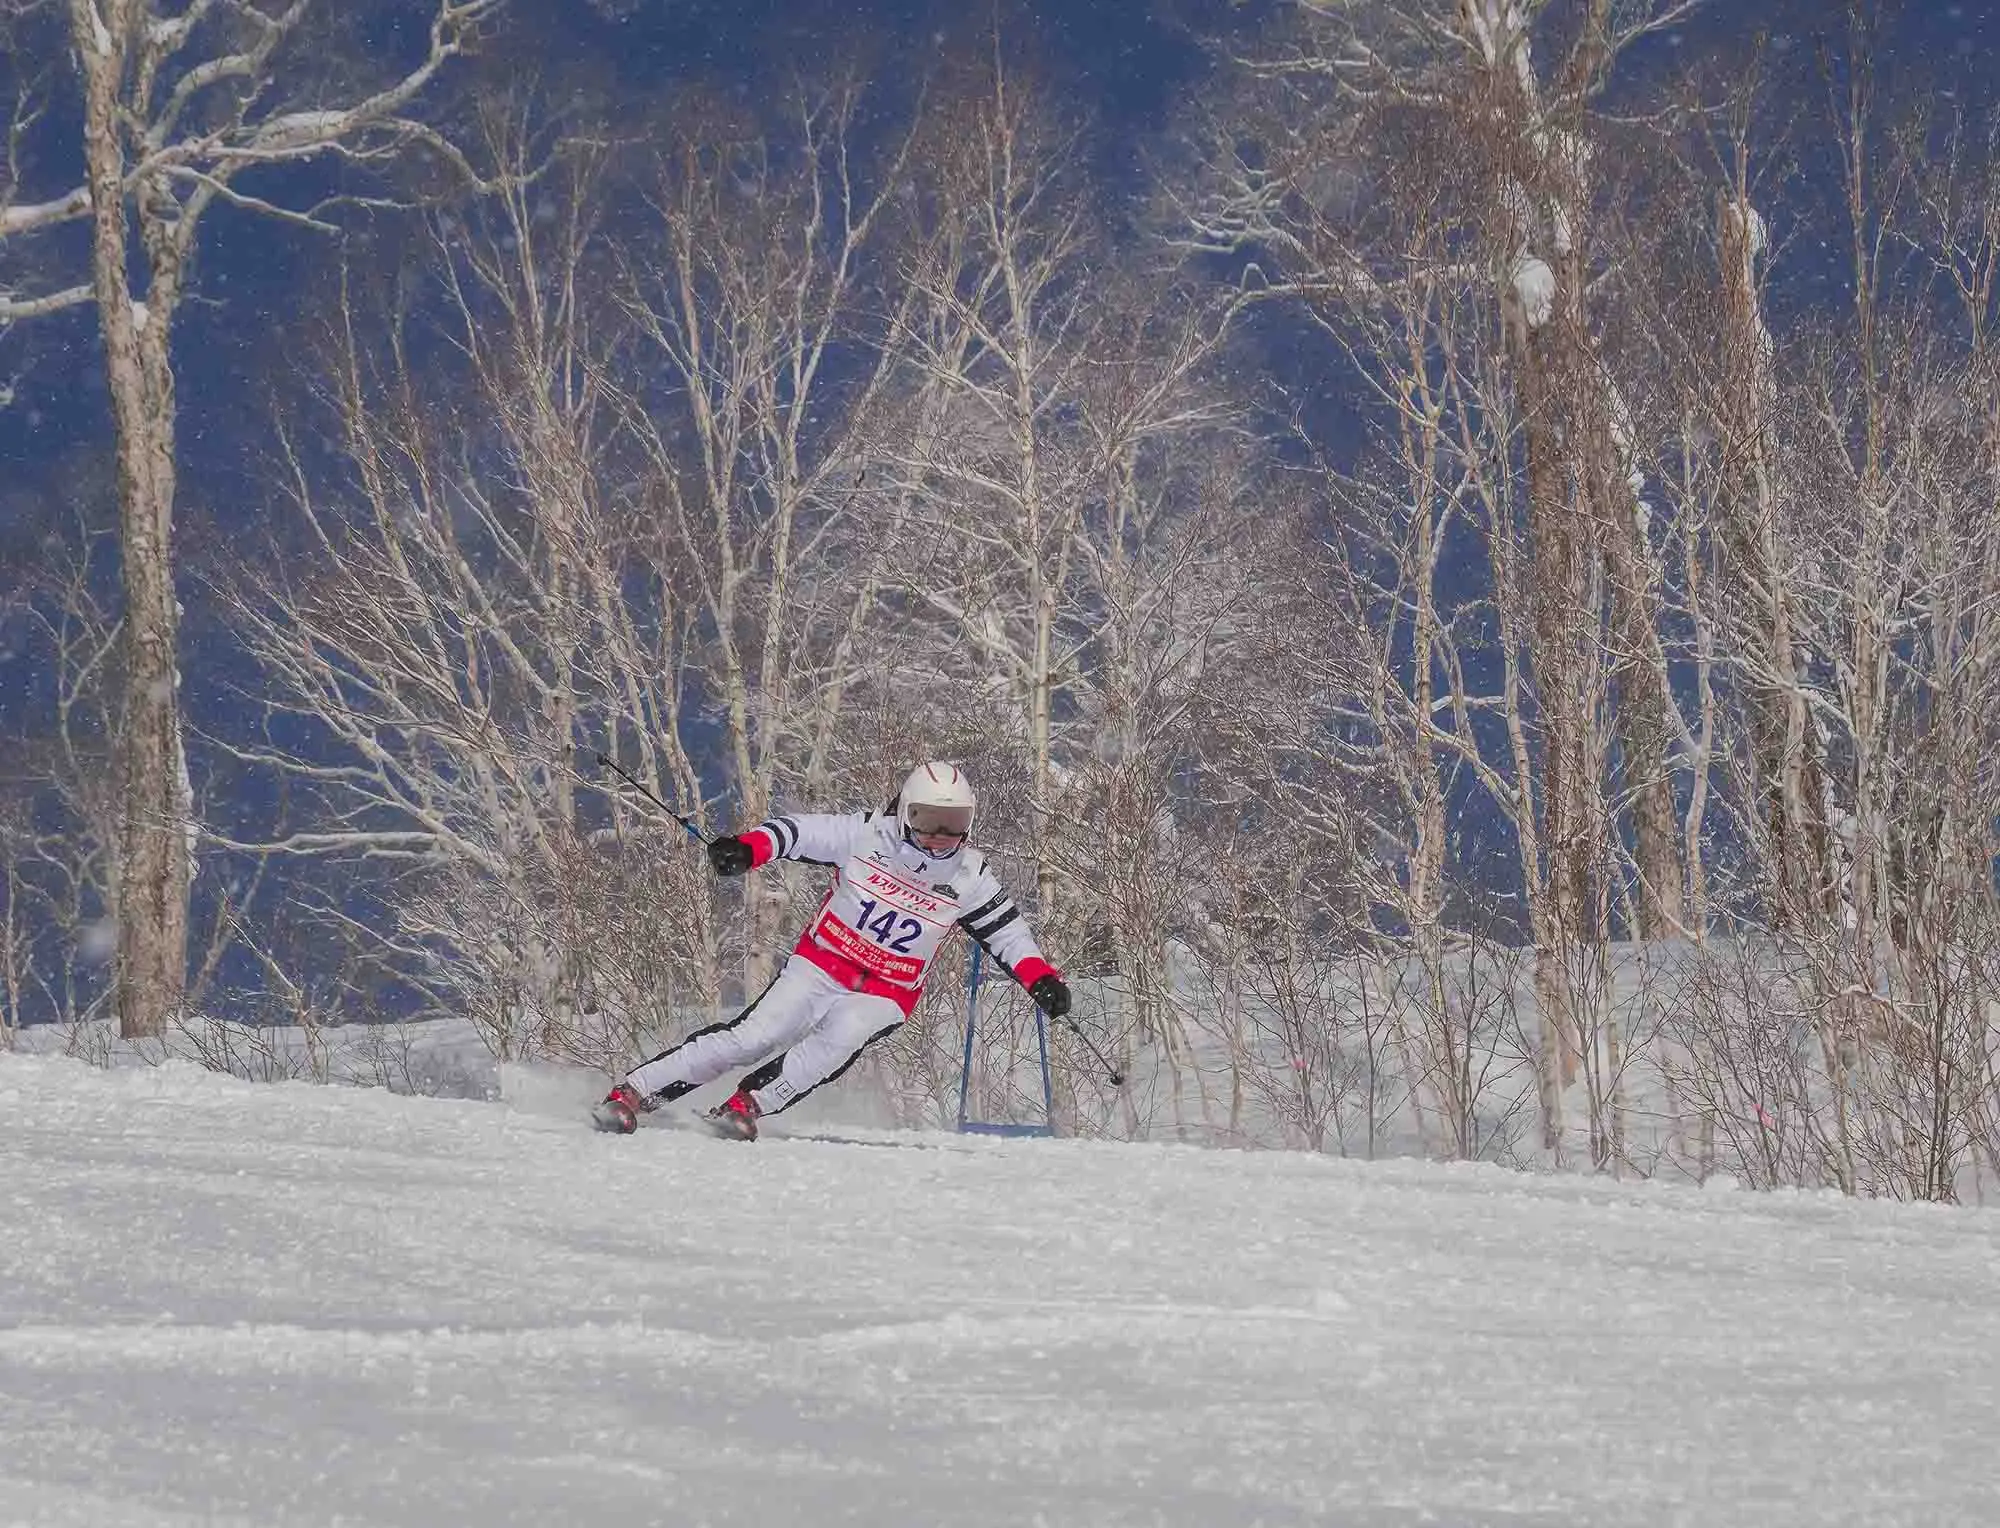 a skier in white race kit makes a turn in front of spindly birch trees